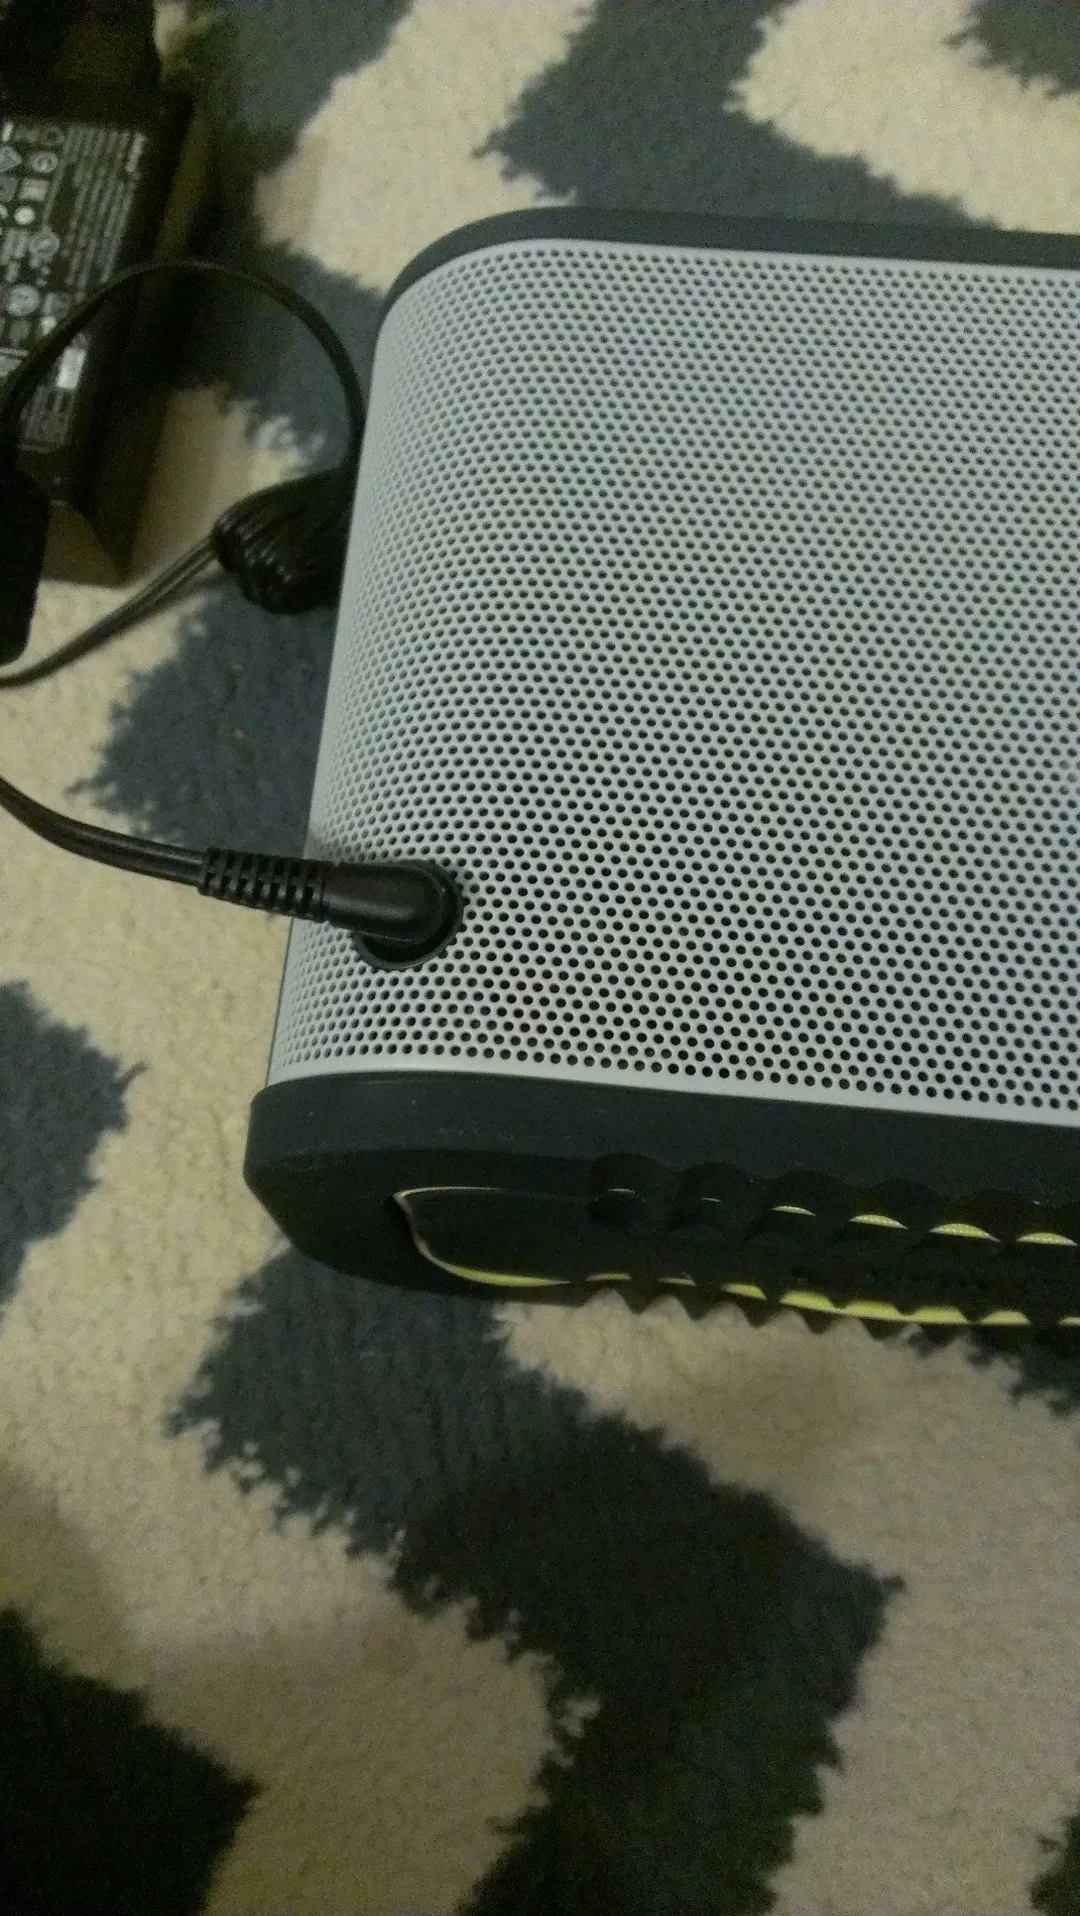 Jabra Solemate Max charging port strangely on front